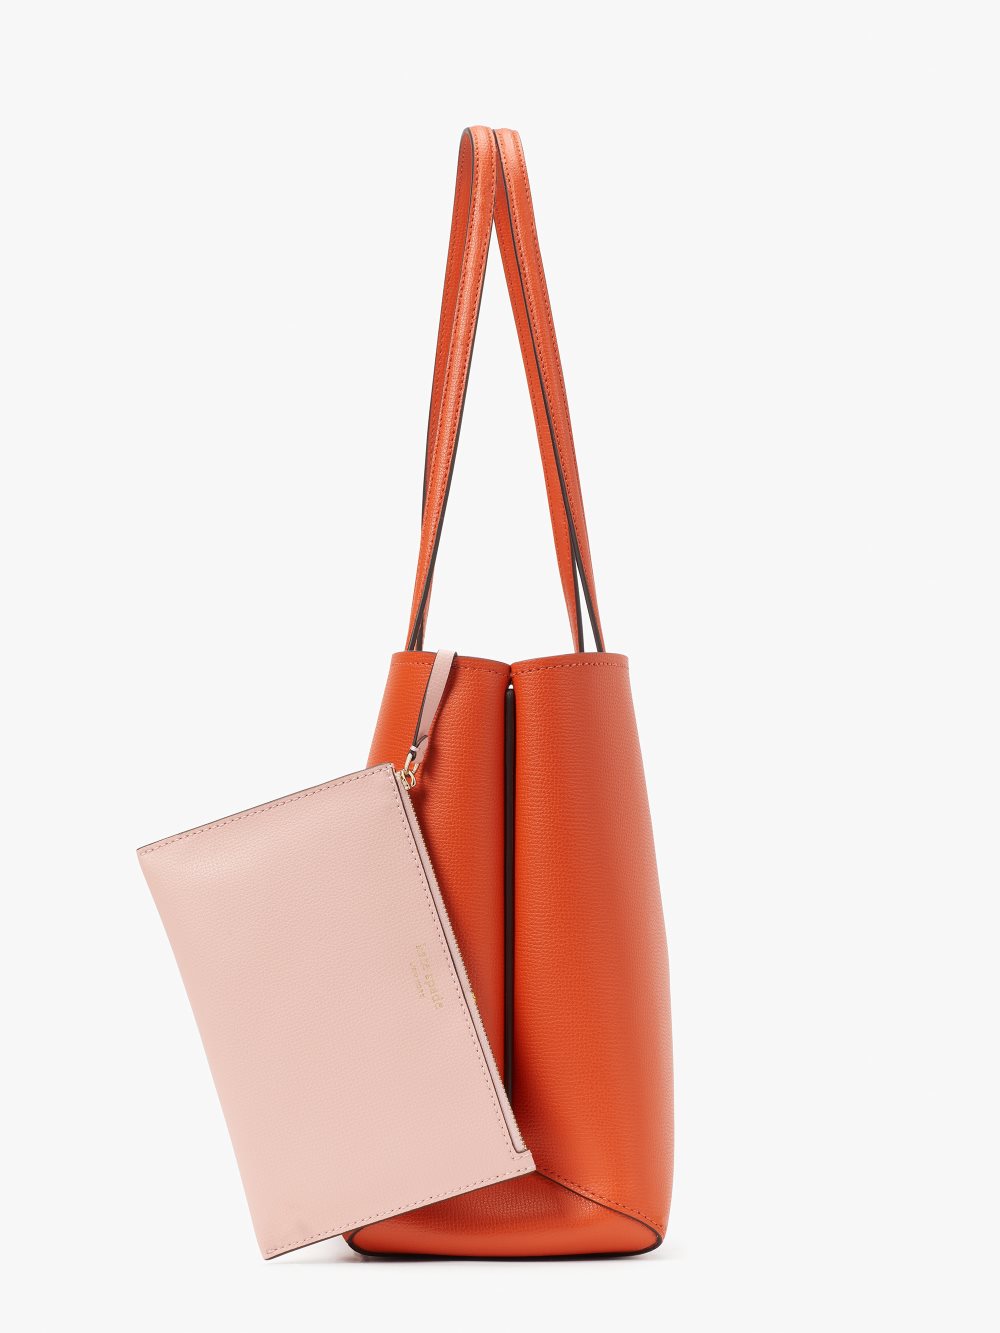 Women's dried apricot all day large tote | Kate Spade